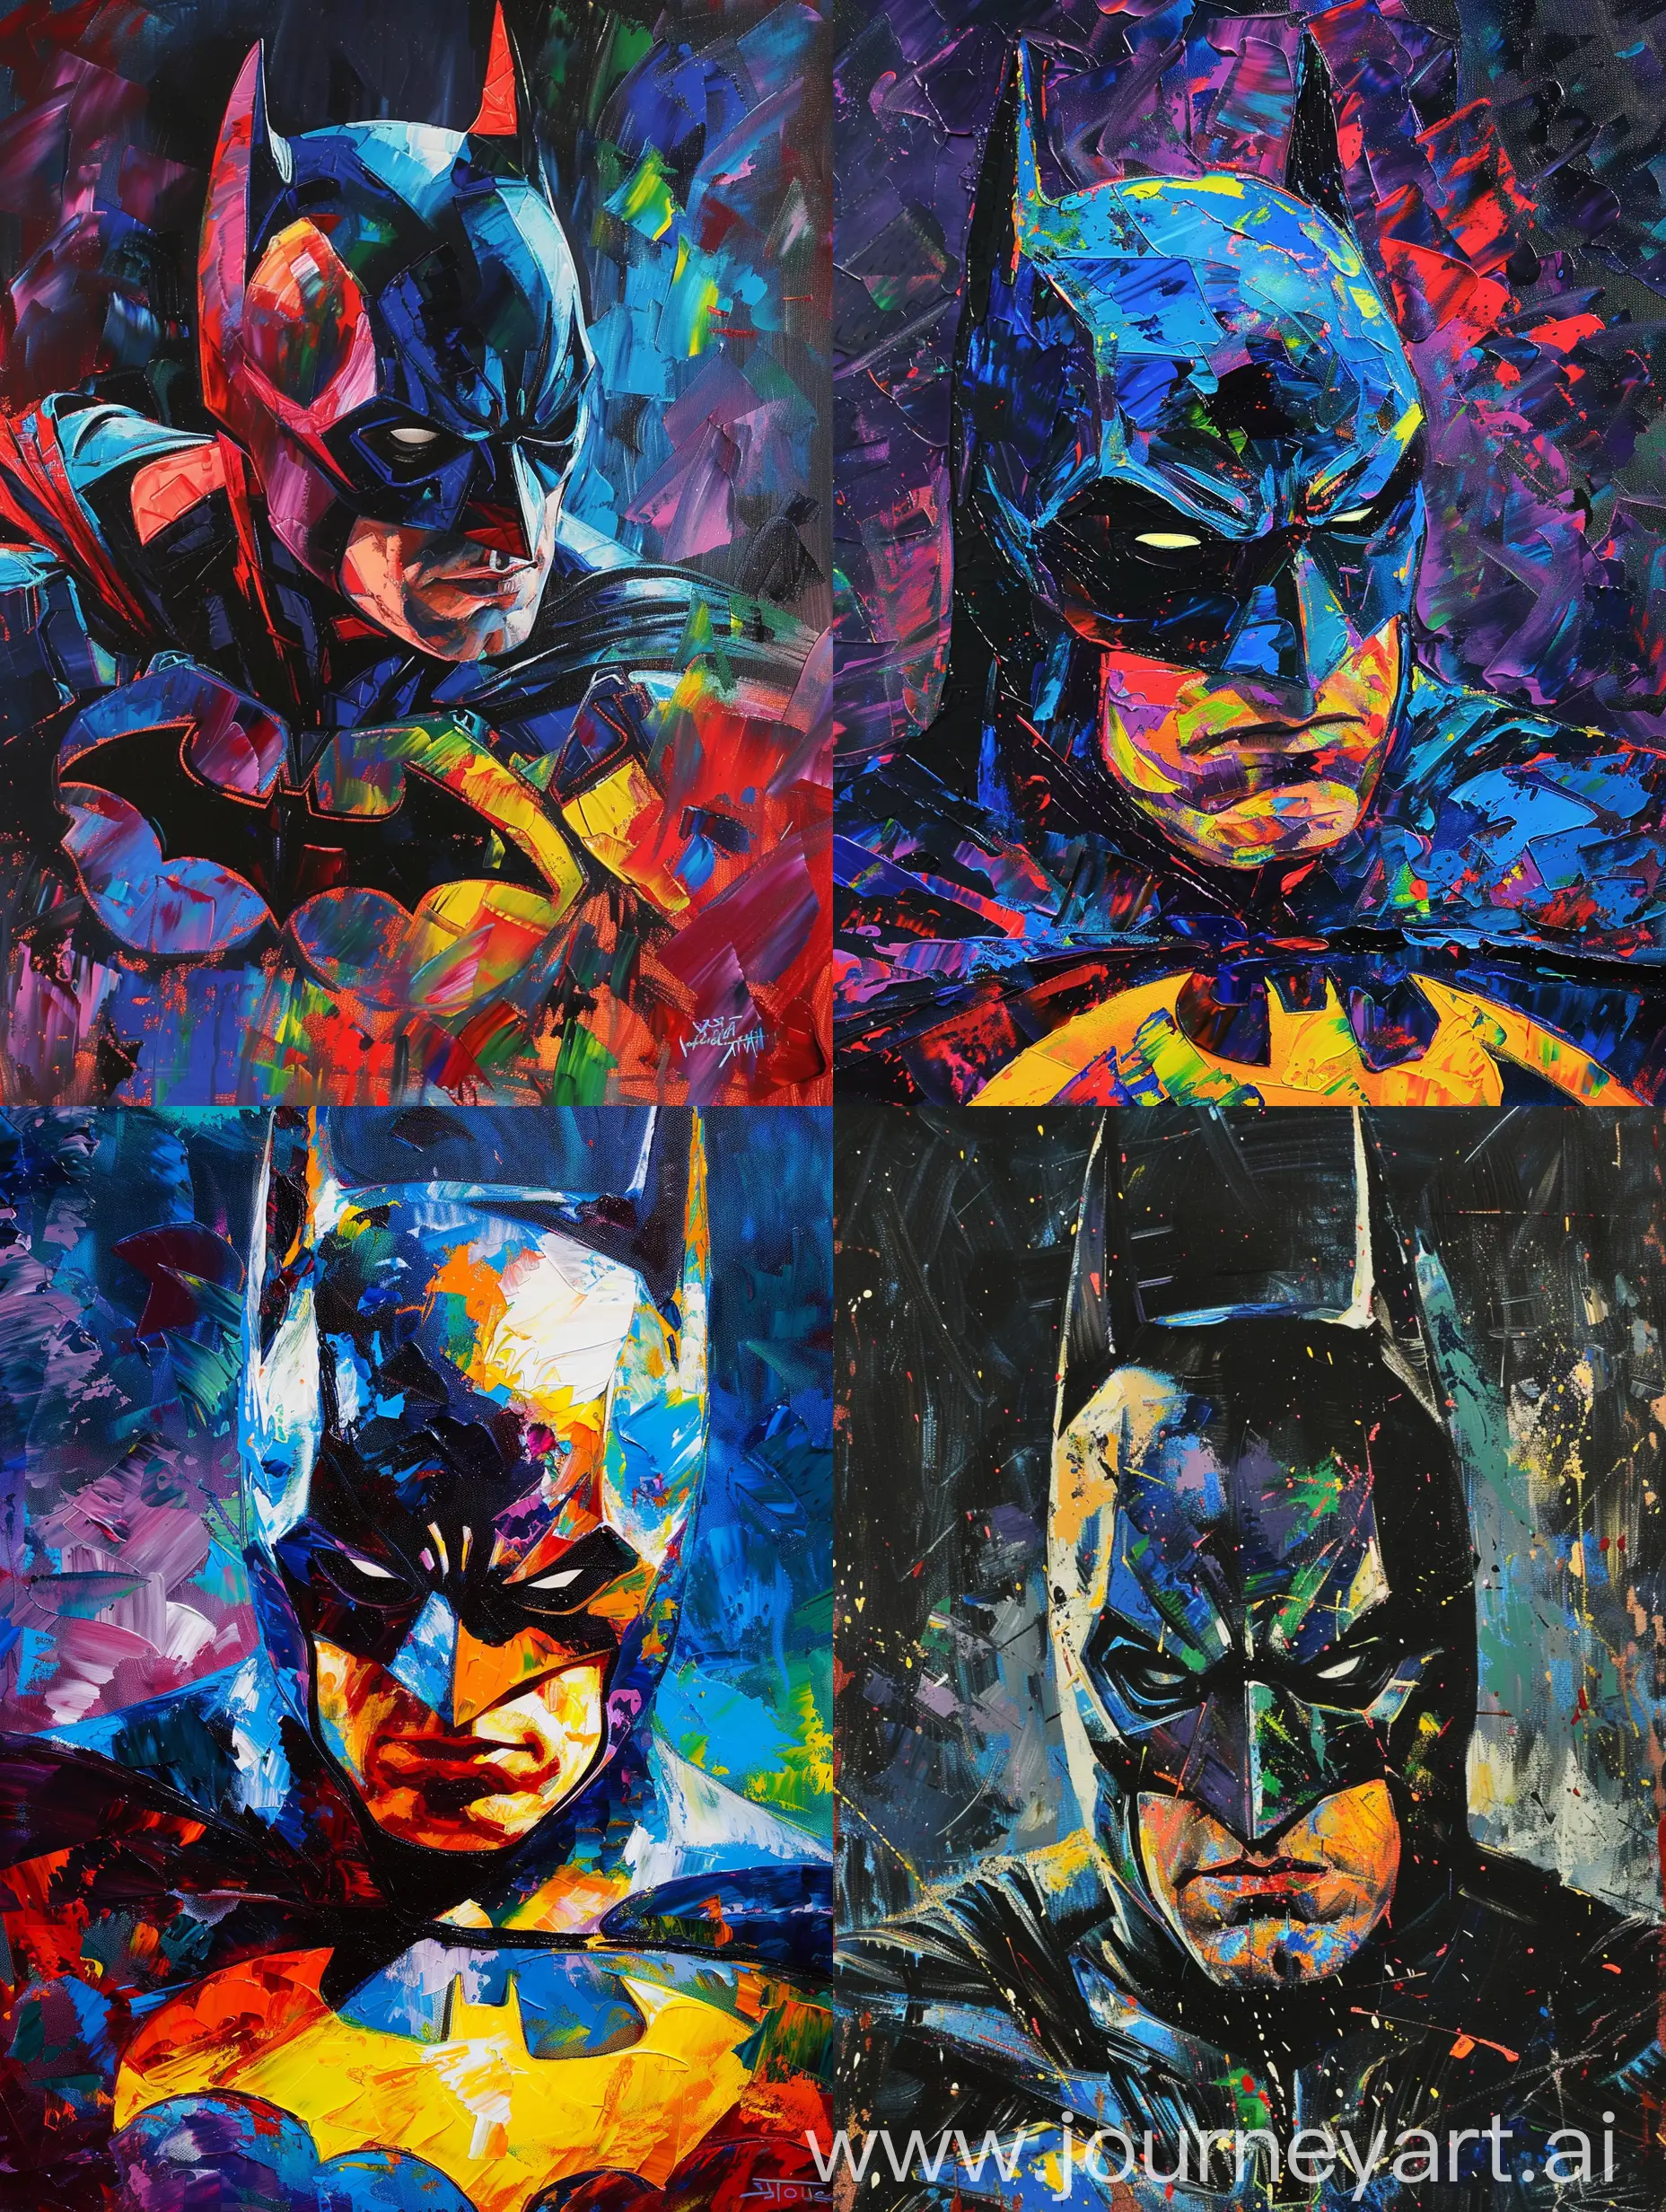 Vibrant-Van-Gogh-Style-Oil-Painting-of-Batman-in-Extreme-Radioactive-Colors